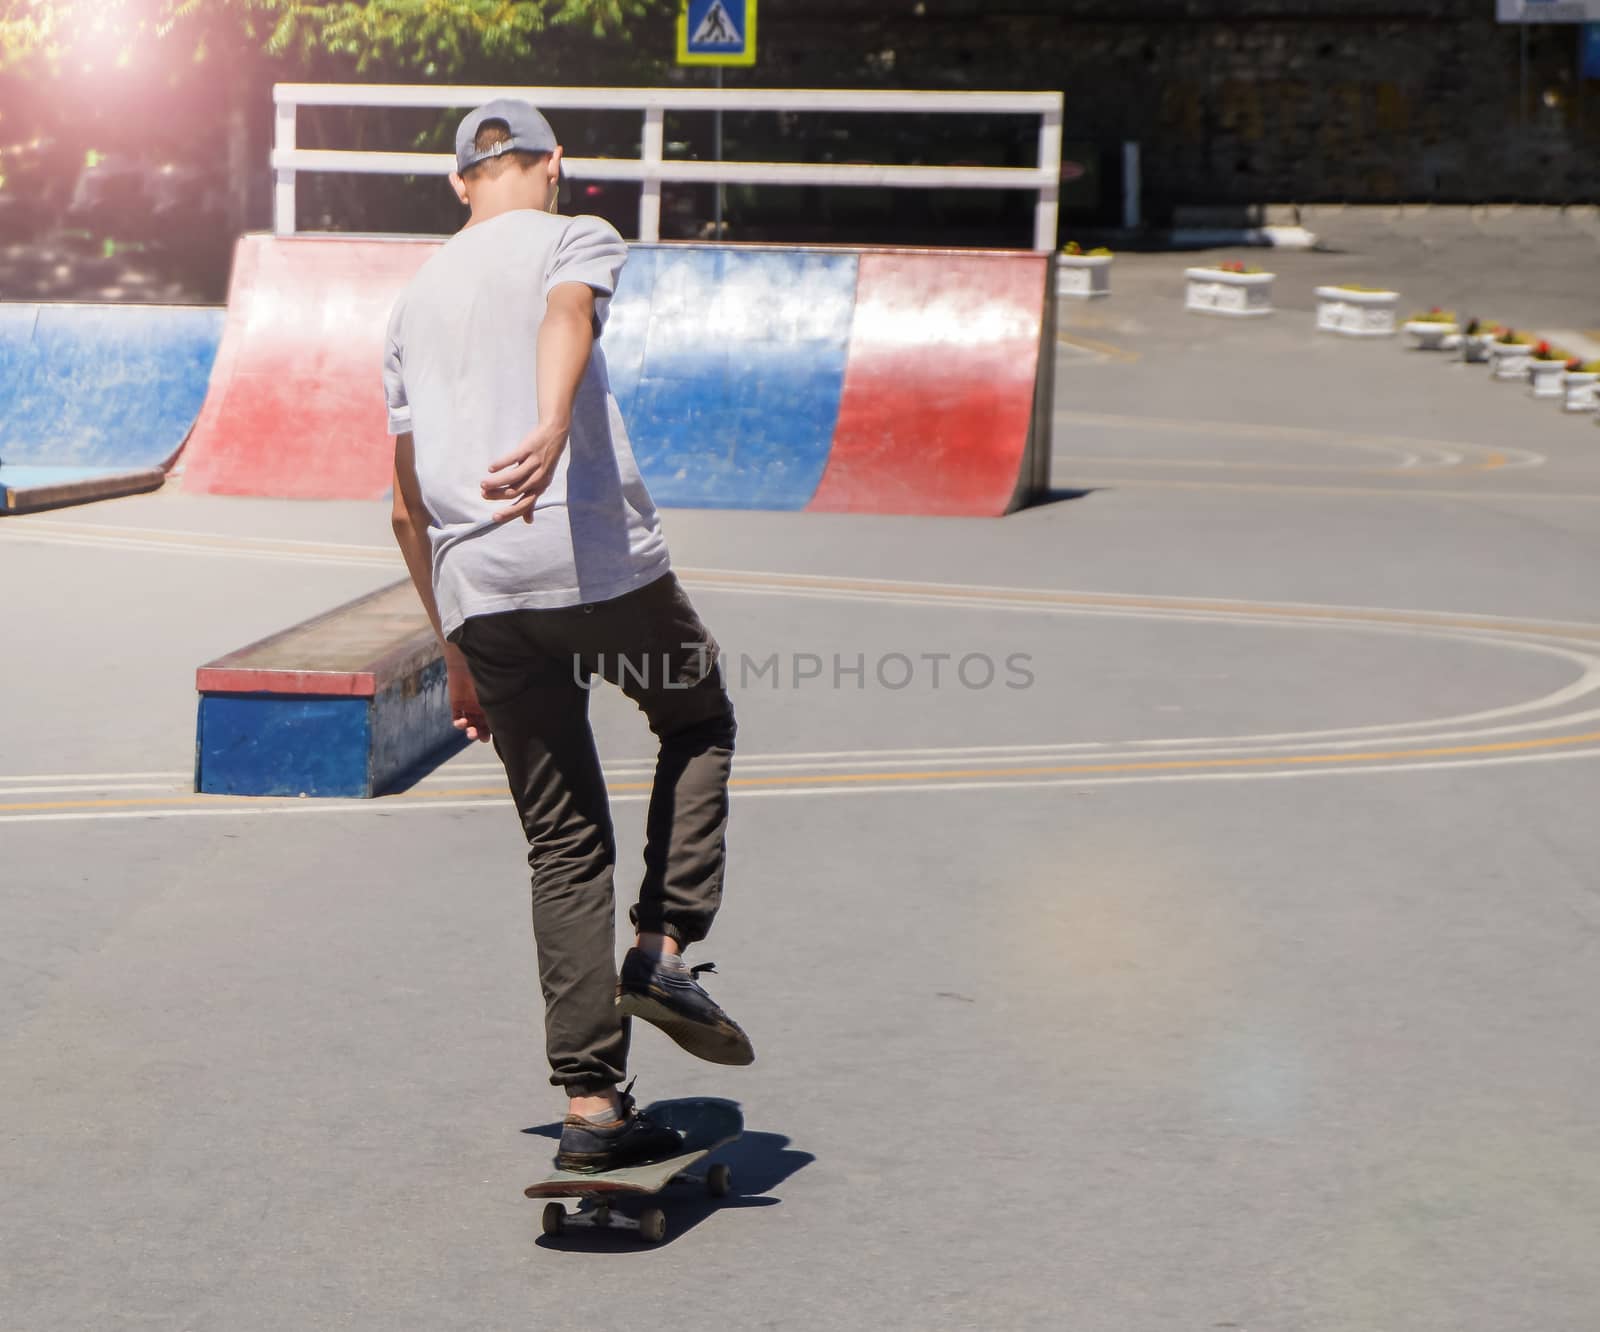 A teenage boy trains to ride a skateboard in a skate Park, a view from the back by claire_lucia